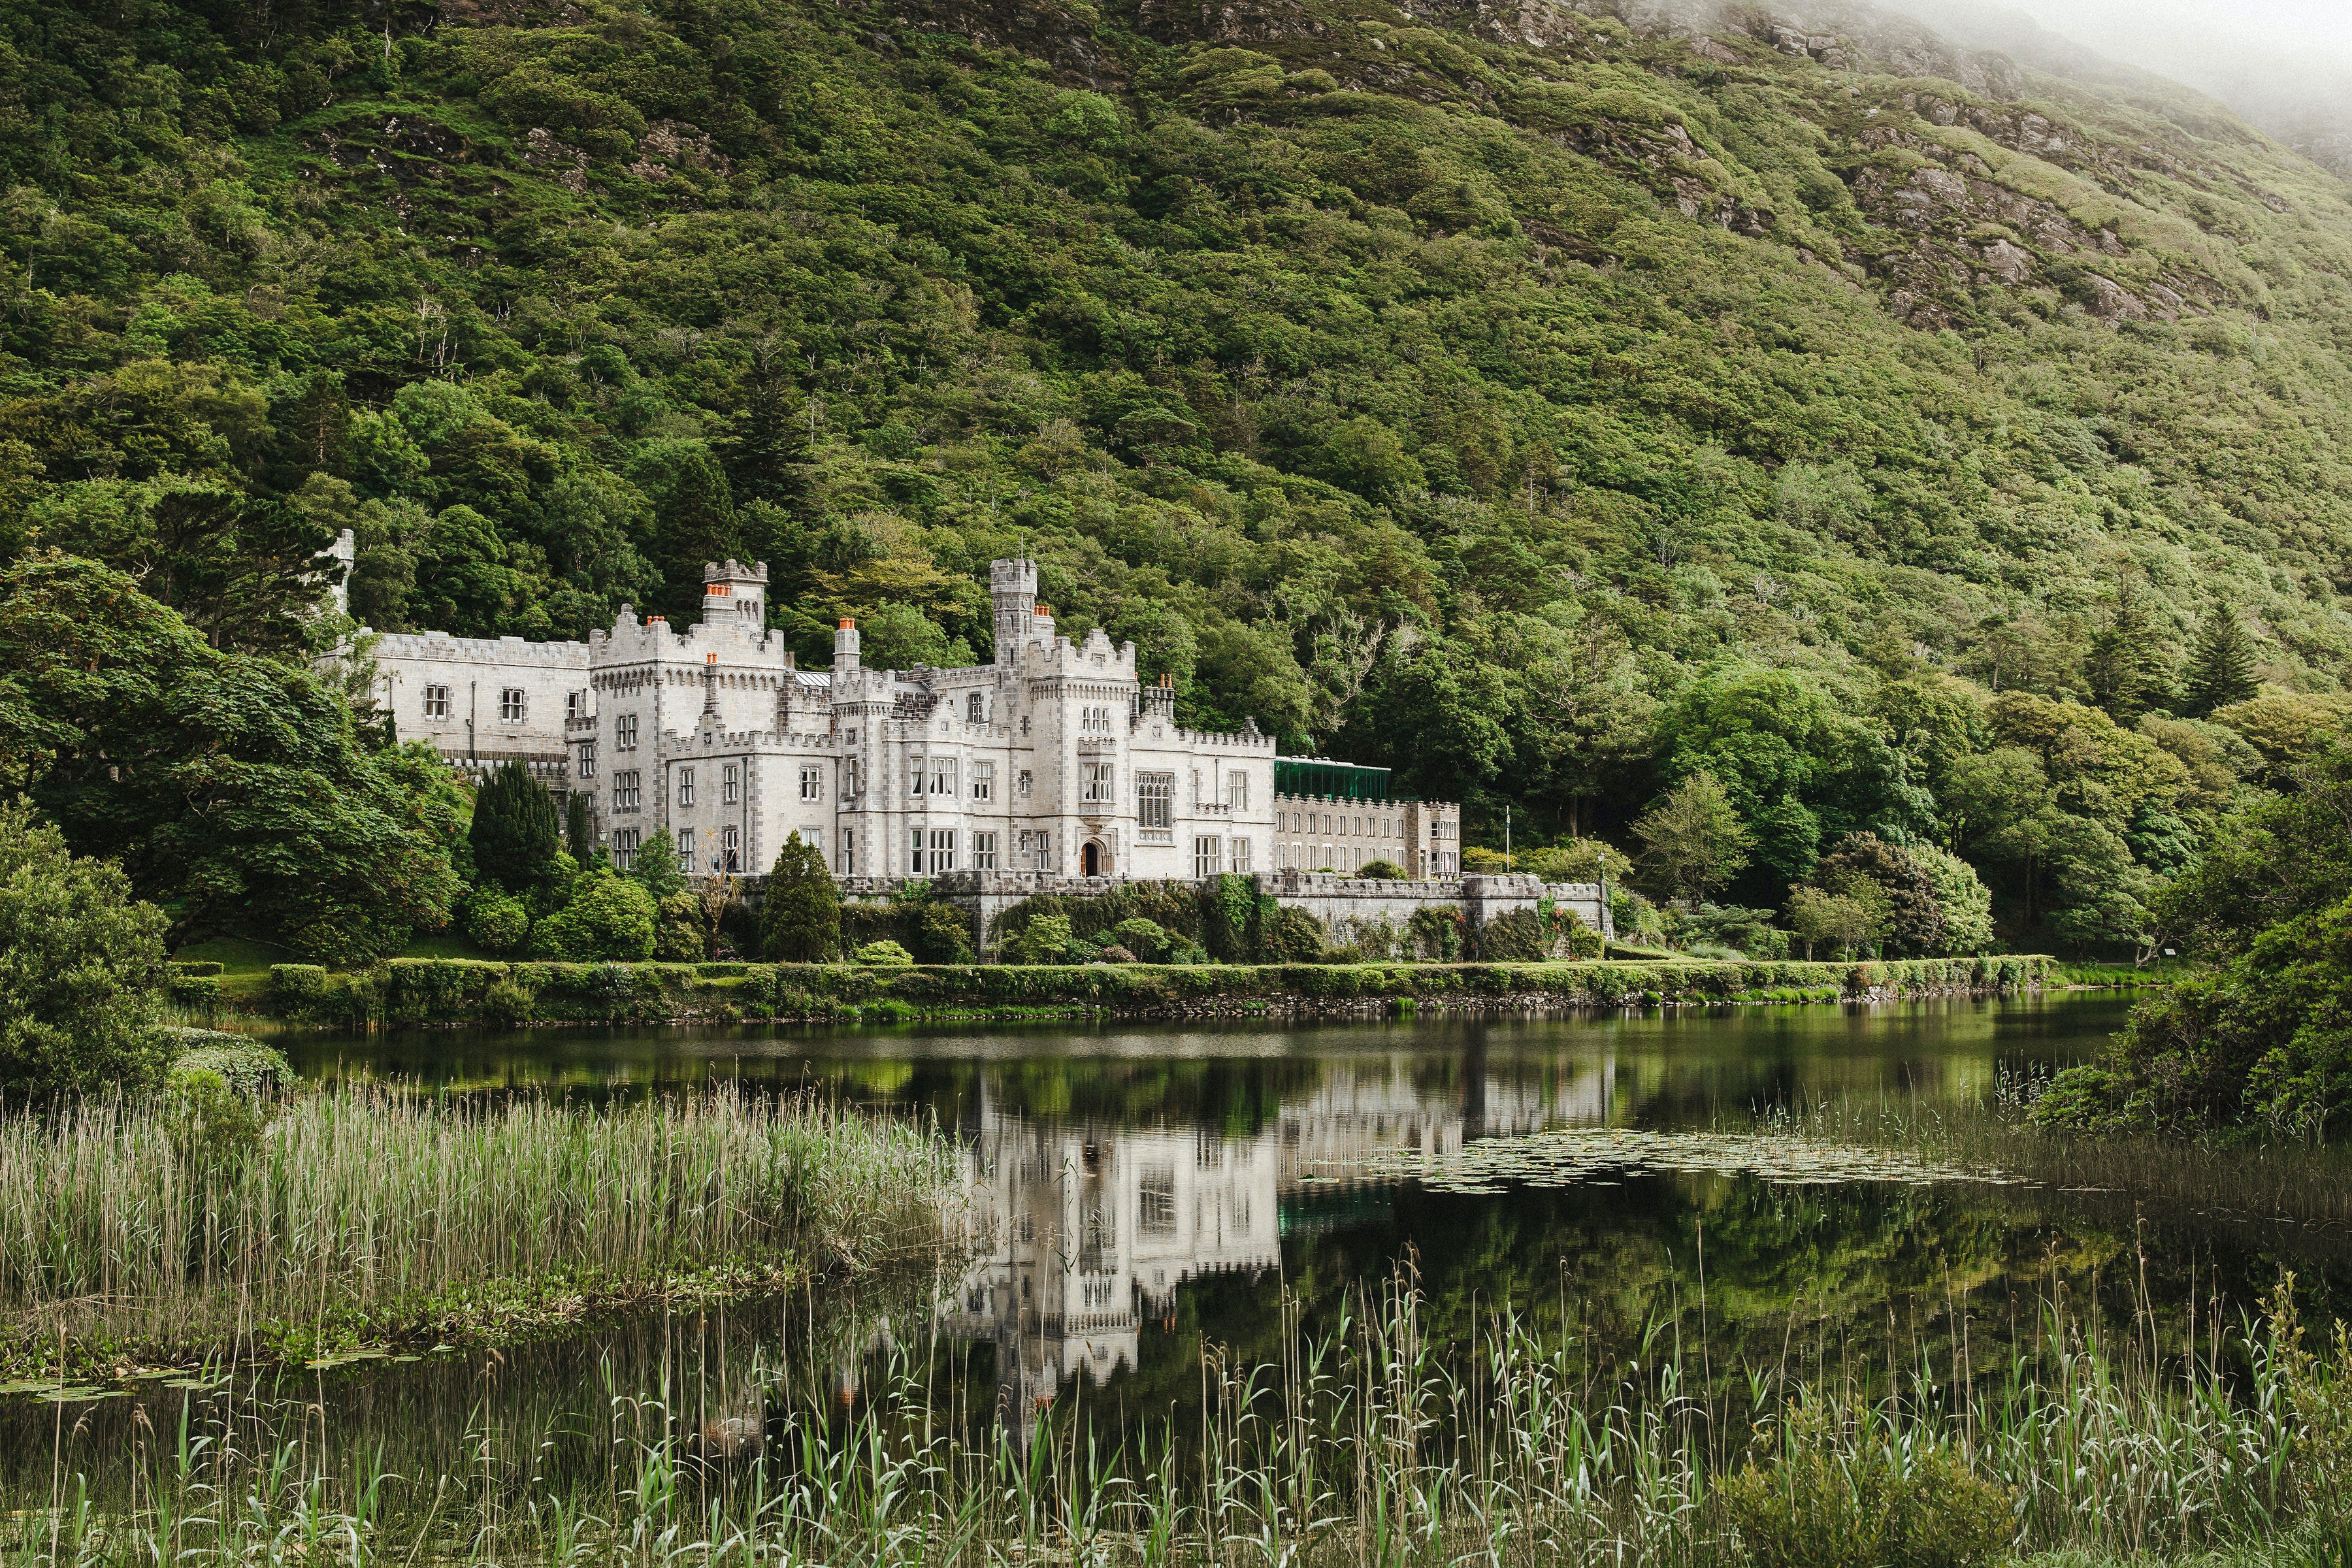 <p><strong>Location:</strong> County Galway</p> <p>Mountains and valleys, lakes and streams, all combine to make Connemara one of the loveliest regions in Ireland. See Kylemore Abbey in the heart of the Connemara mountains for proof. This impressive structure was built in 1868 as one of the great neo-Gothic castles of the period. It is now a Benedictine abbey run by nuns, and the church and gardens have been completely restored.</p><p>Sign up to receive the latest news, expert tips, and inspiration on all things travel</p><a href="https://www.cntraveler.com/newsletter/the-daily?sourceCode=msnsend">Inspire Me</a>